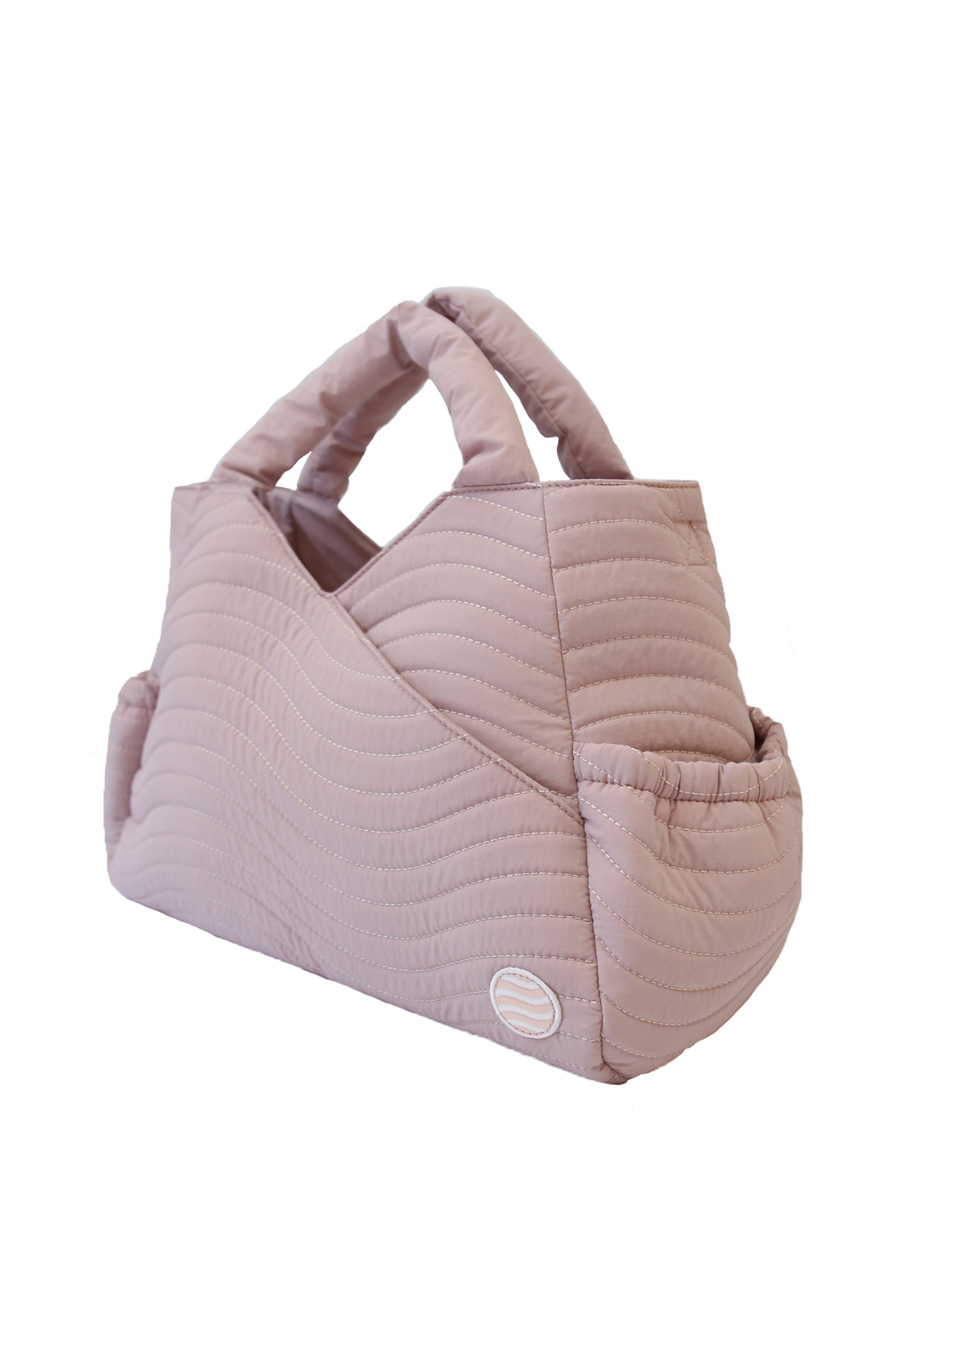 QUILTED LARGE TOTE